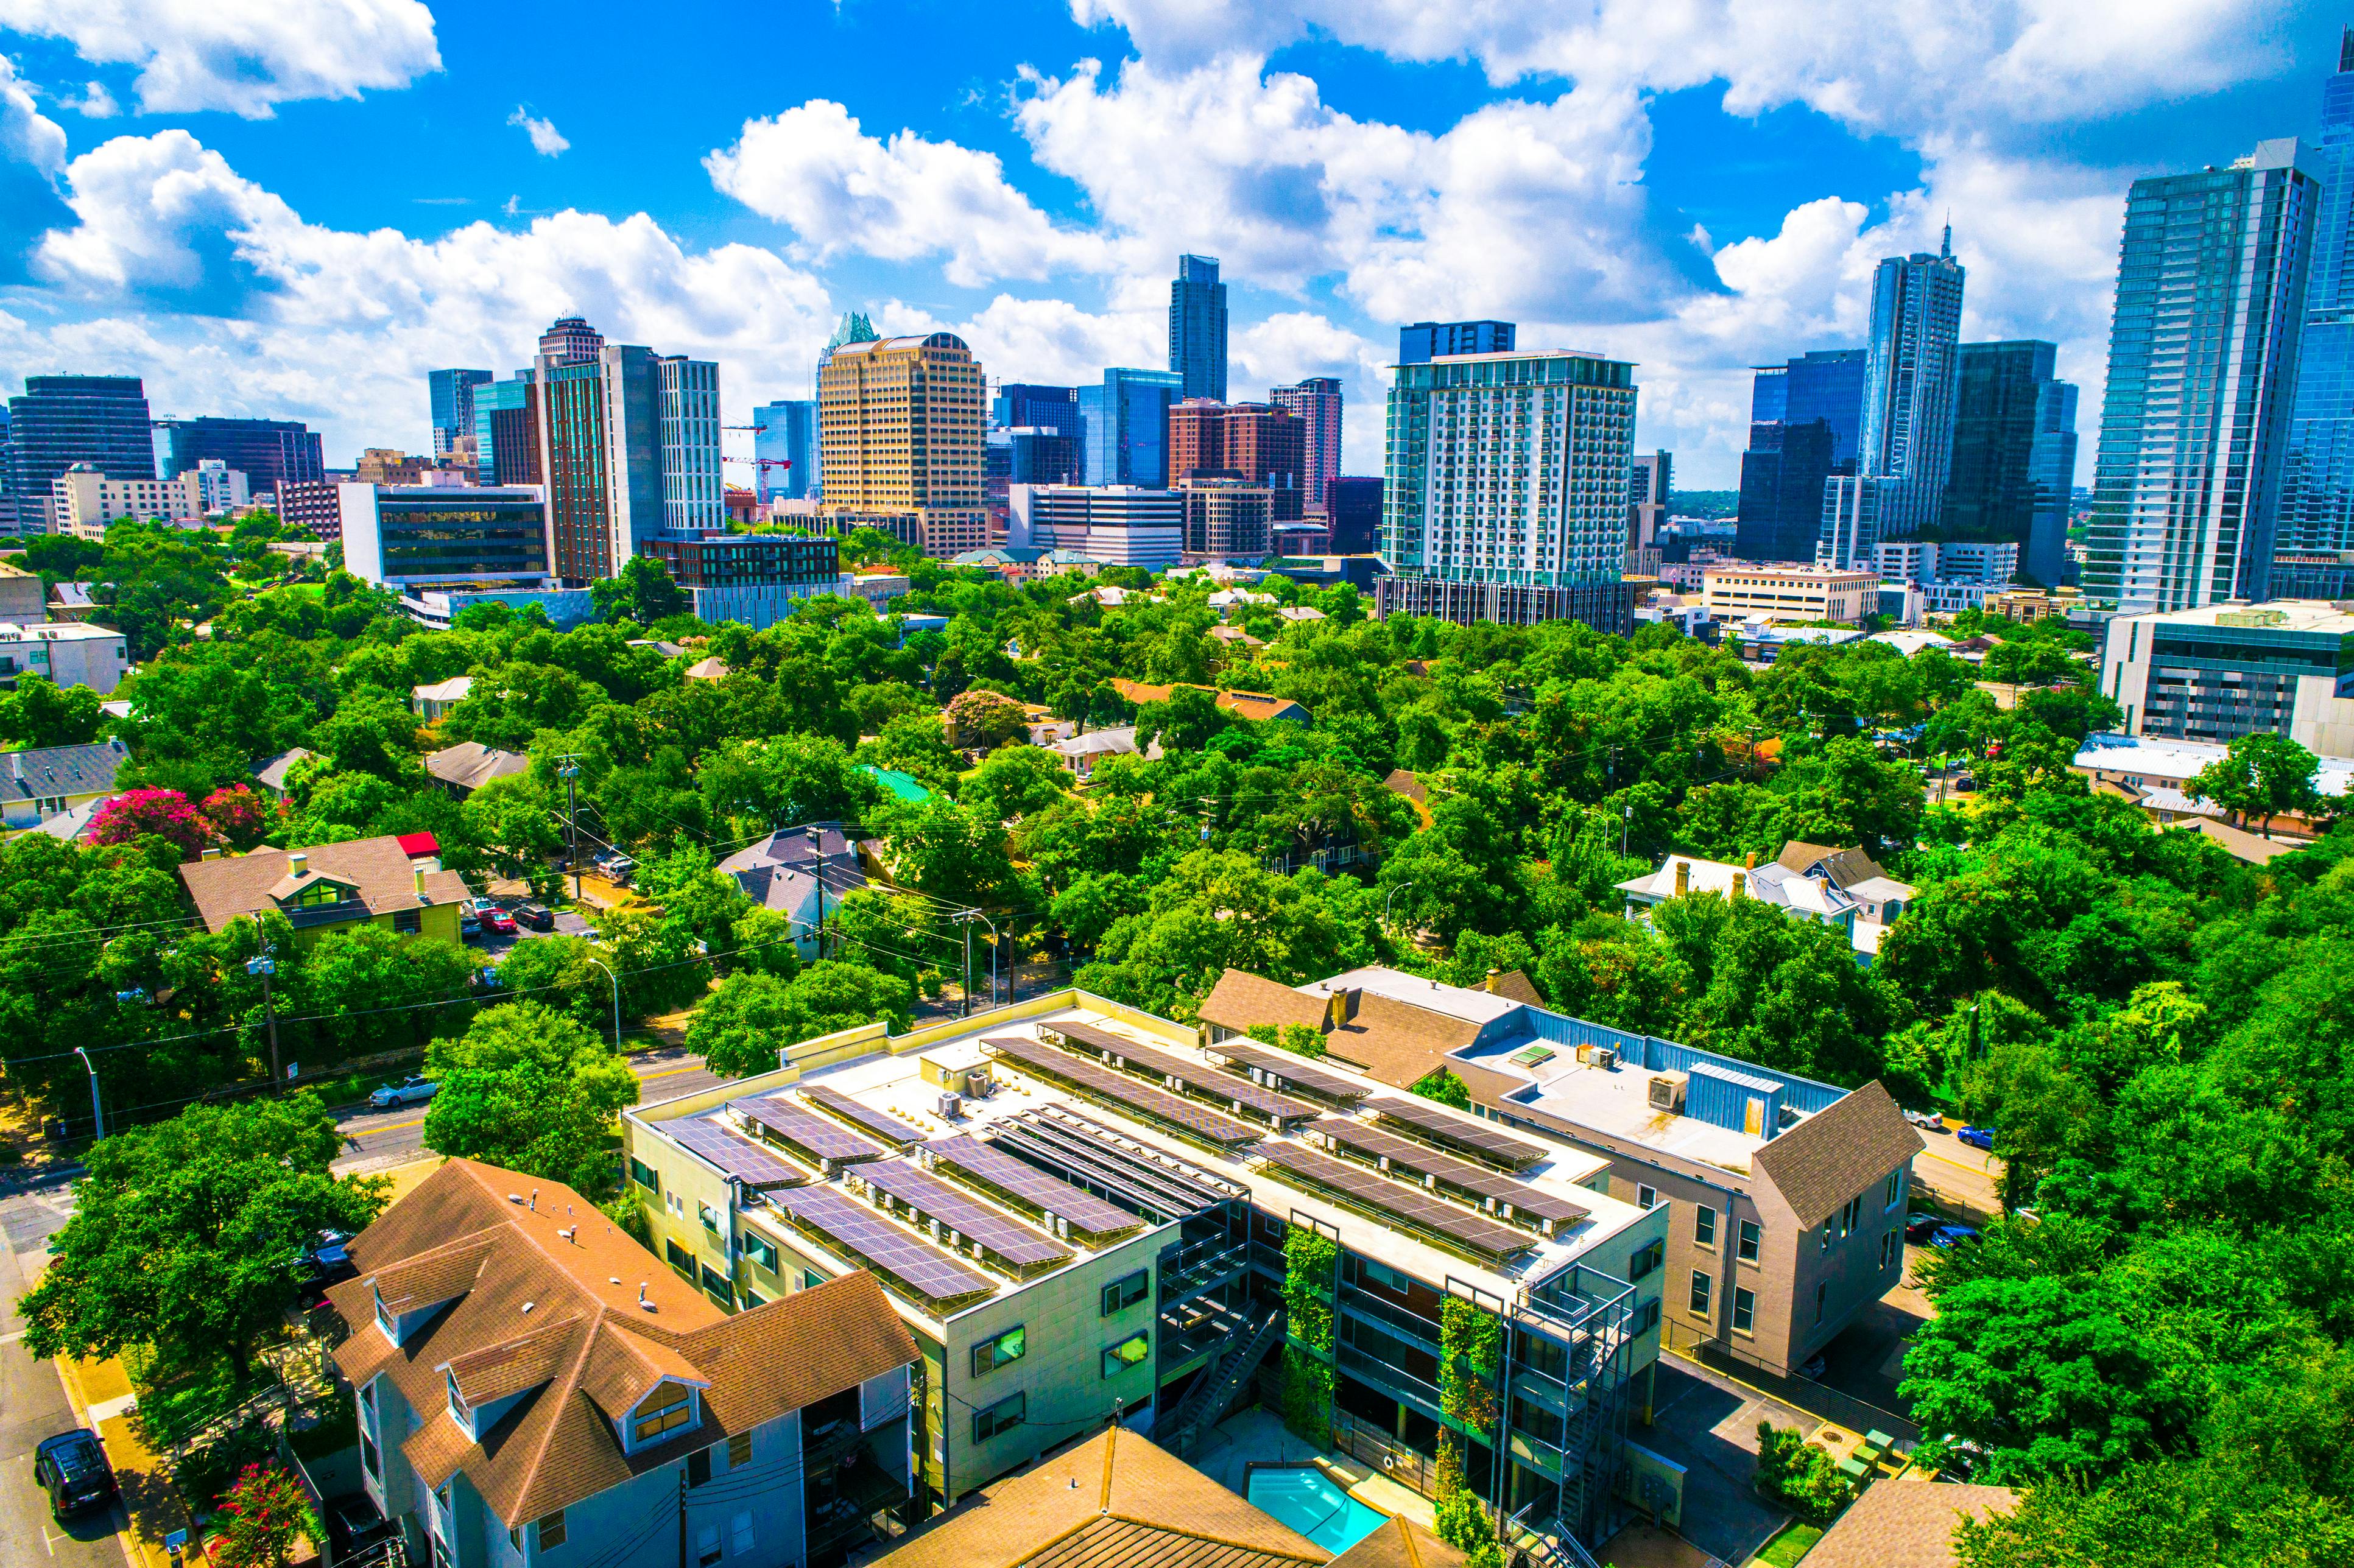 Sustainable urban development practices with homes and buildings integrated into the natural environment. The future of Austin Texas a renewable energy sustainable city.